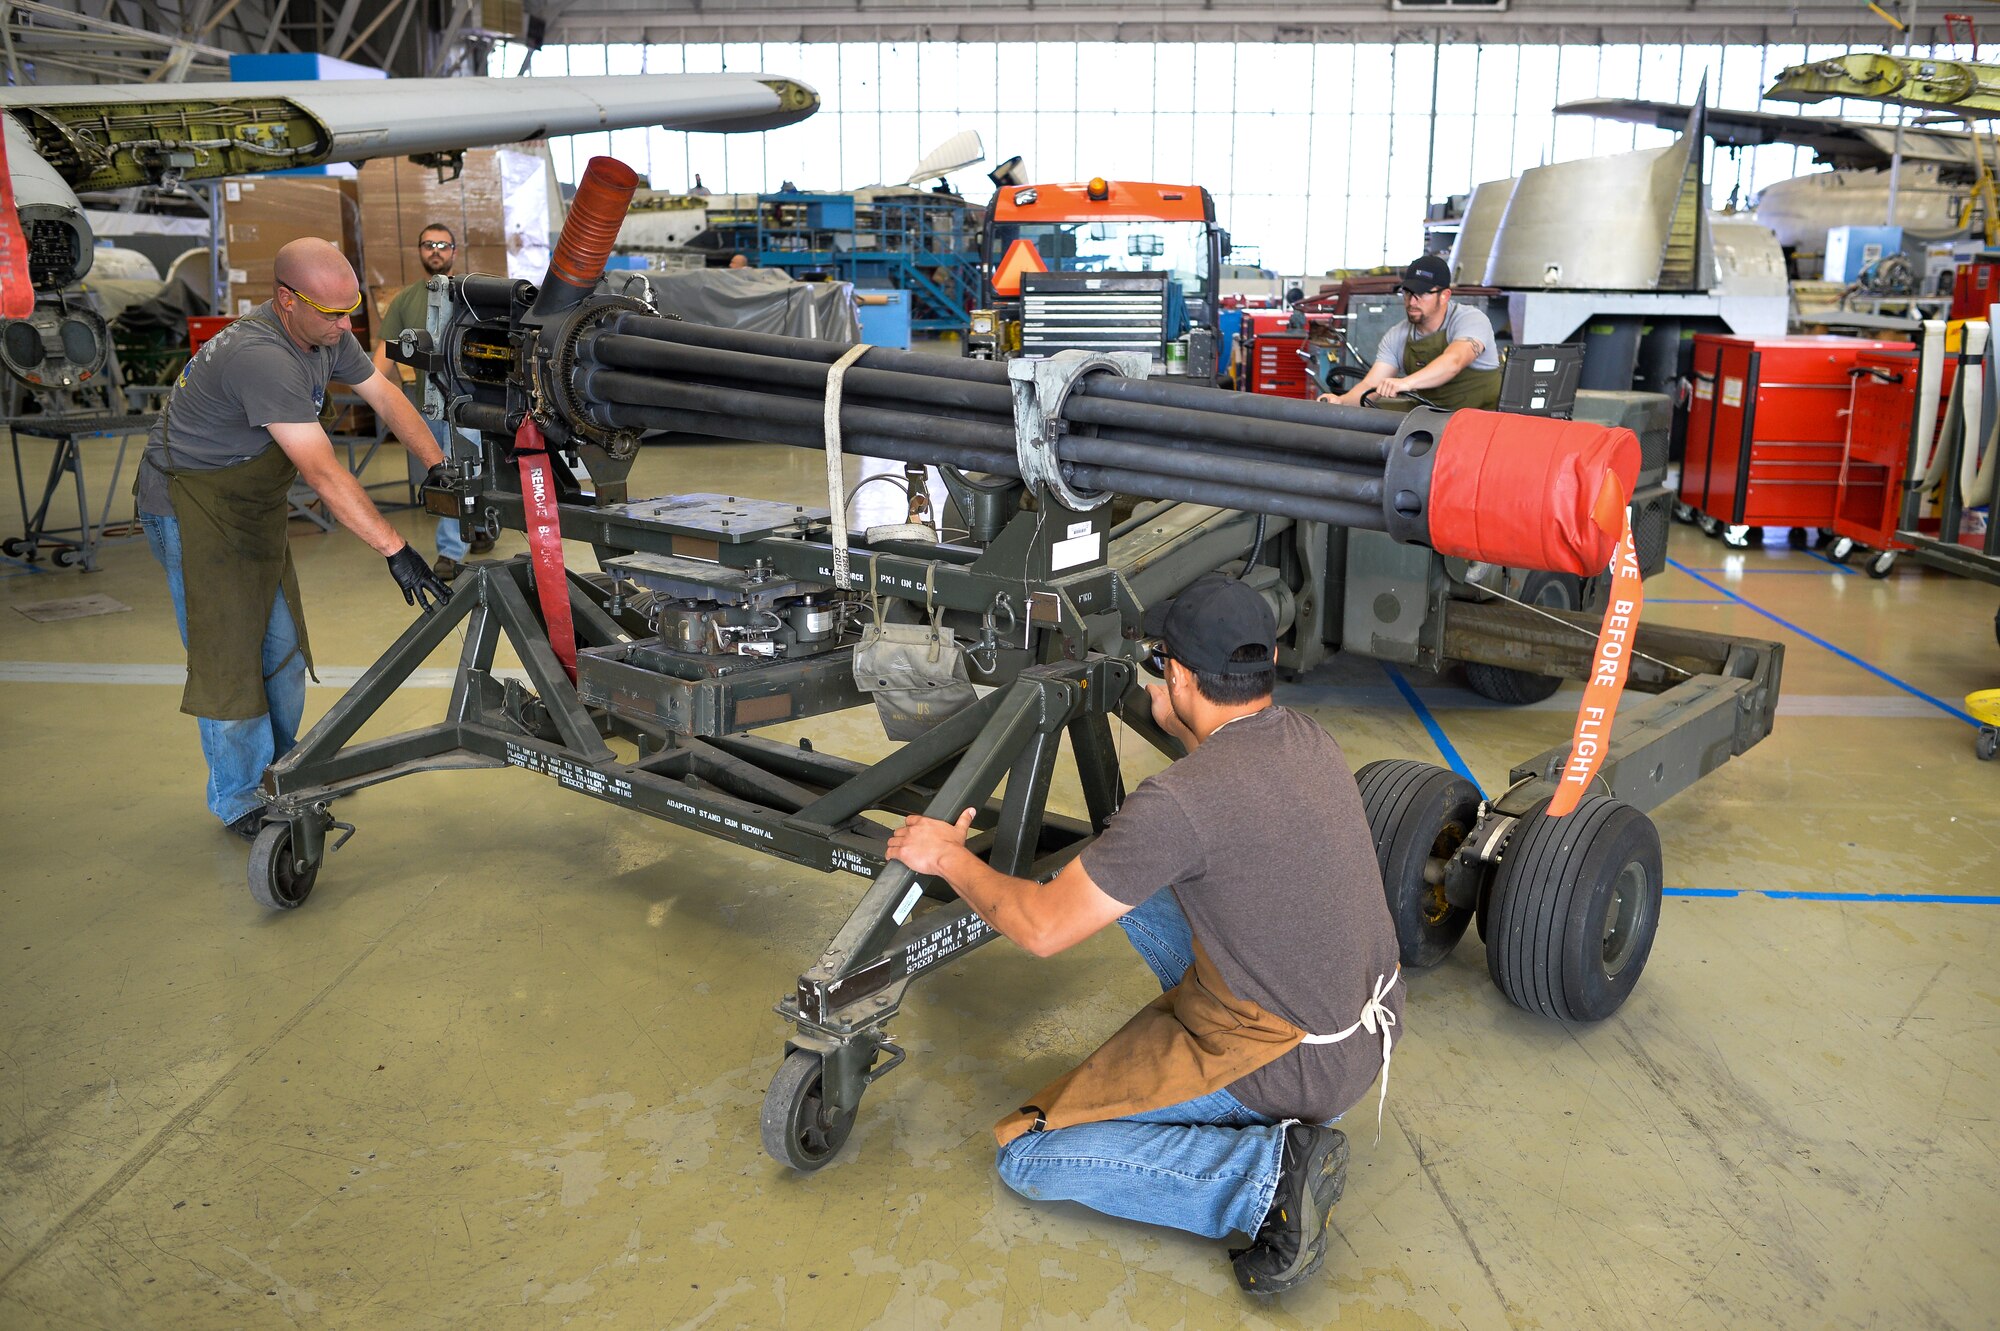 Aircraft ordnance system mechanics from the 531st Commodities Maintenance Squadron remove the ammunition linkage from an A-10 Thunderbolt II aircraft at Hill Air Force Base, Utah, May 24, 2016. 531st CMMXS delivers reconditioned 20 mm and 30 mm aircraft guns back to warfighters from every military branch. (U.S. Air Force photo by R. Nial Bradshaw)